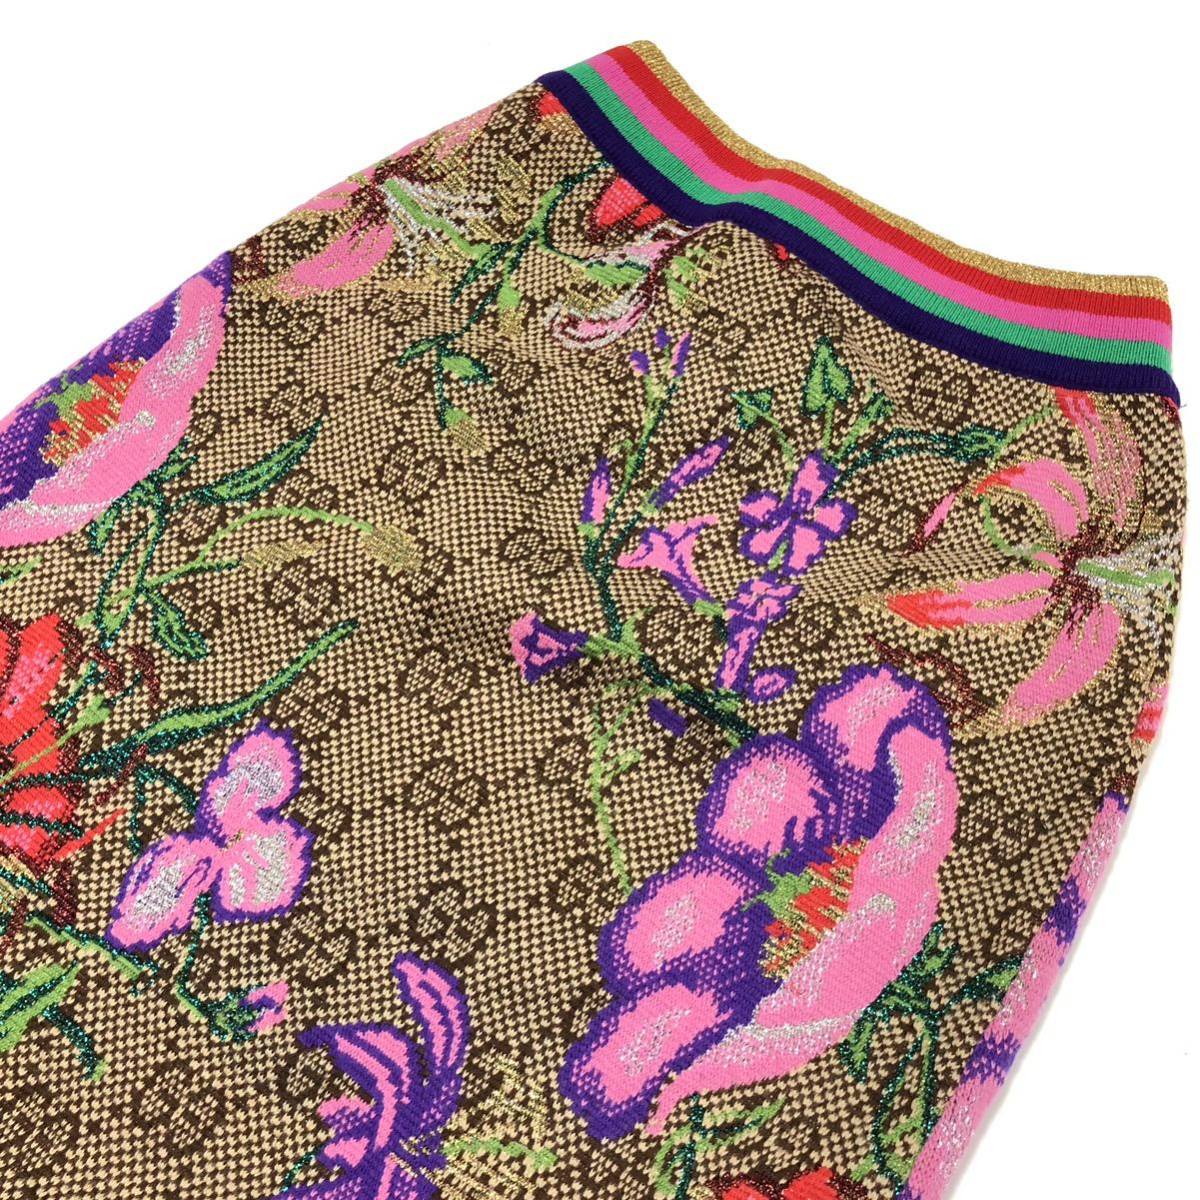  beautiful goods [ Gucci ] standard inside GUCCI skirt GG pattern flora floral print size S 606084 for women lady's Italy made 